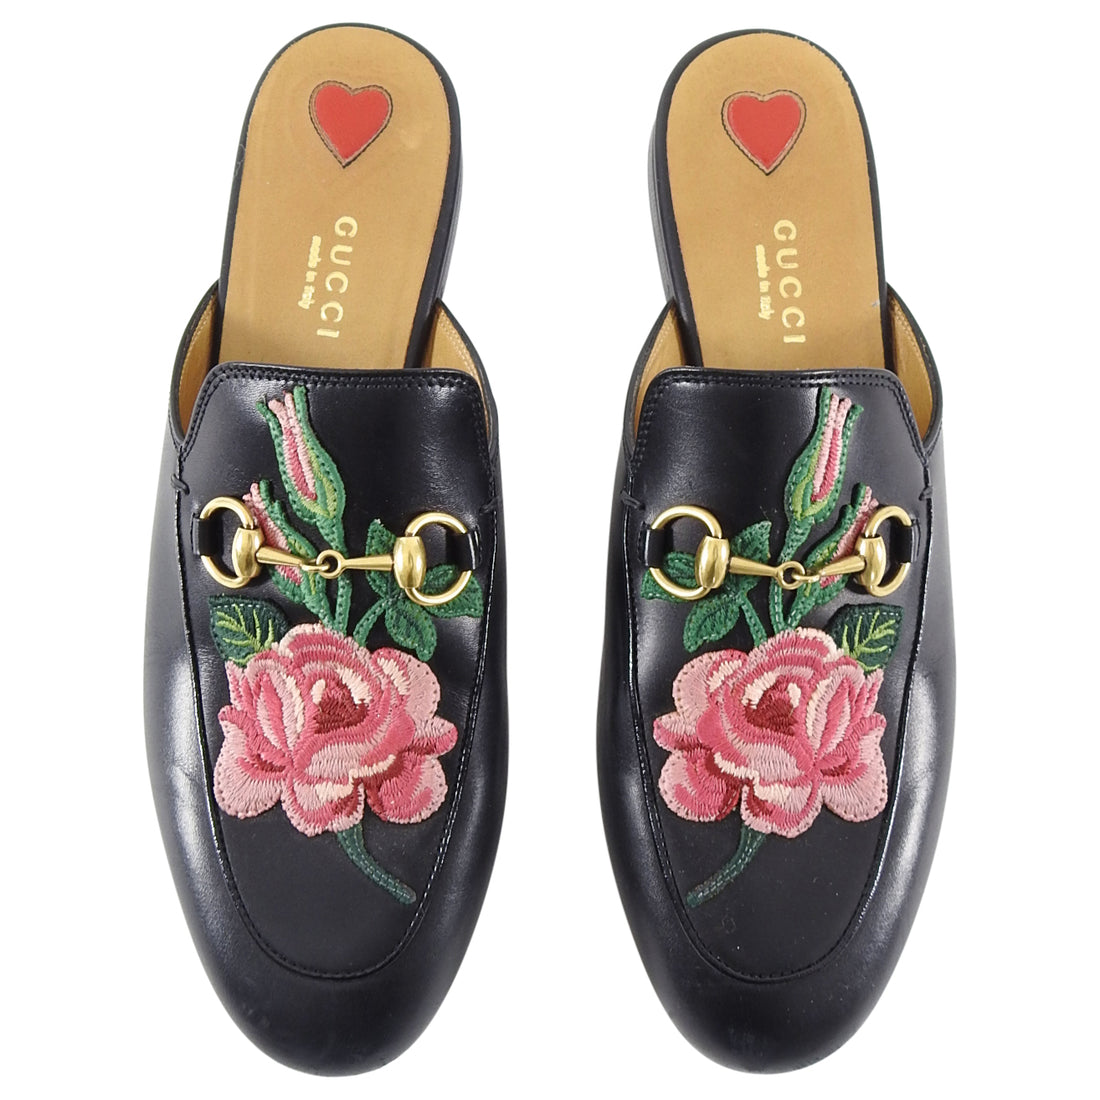 Gucci Princetown Slipper with Embroidered Rose - 6.5